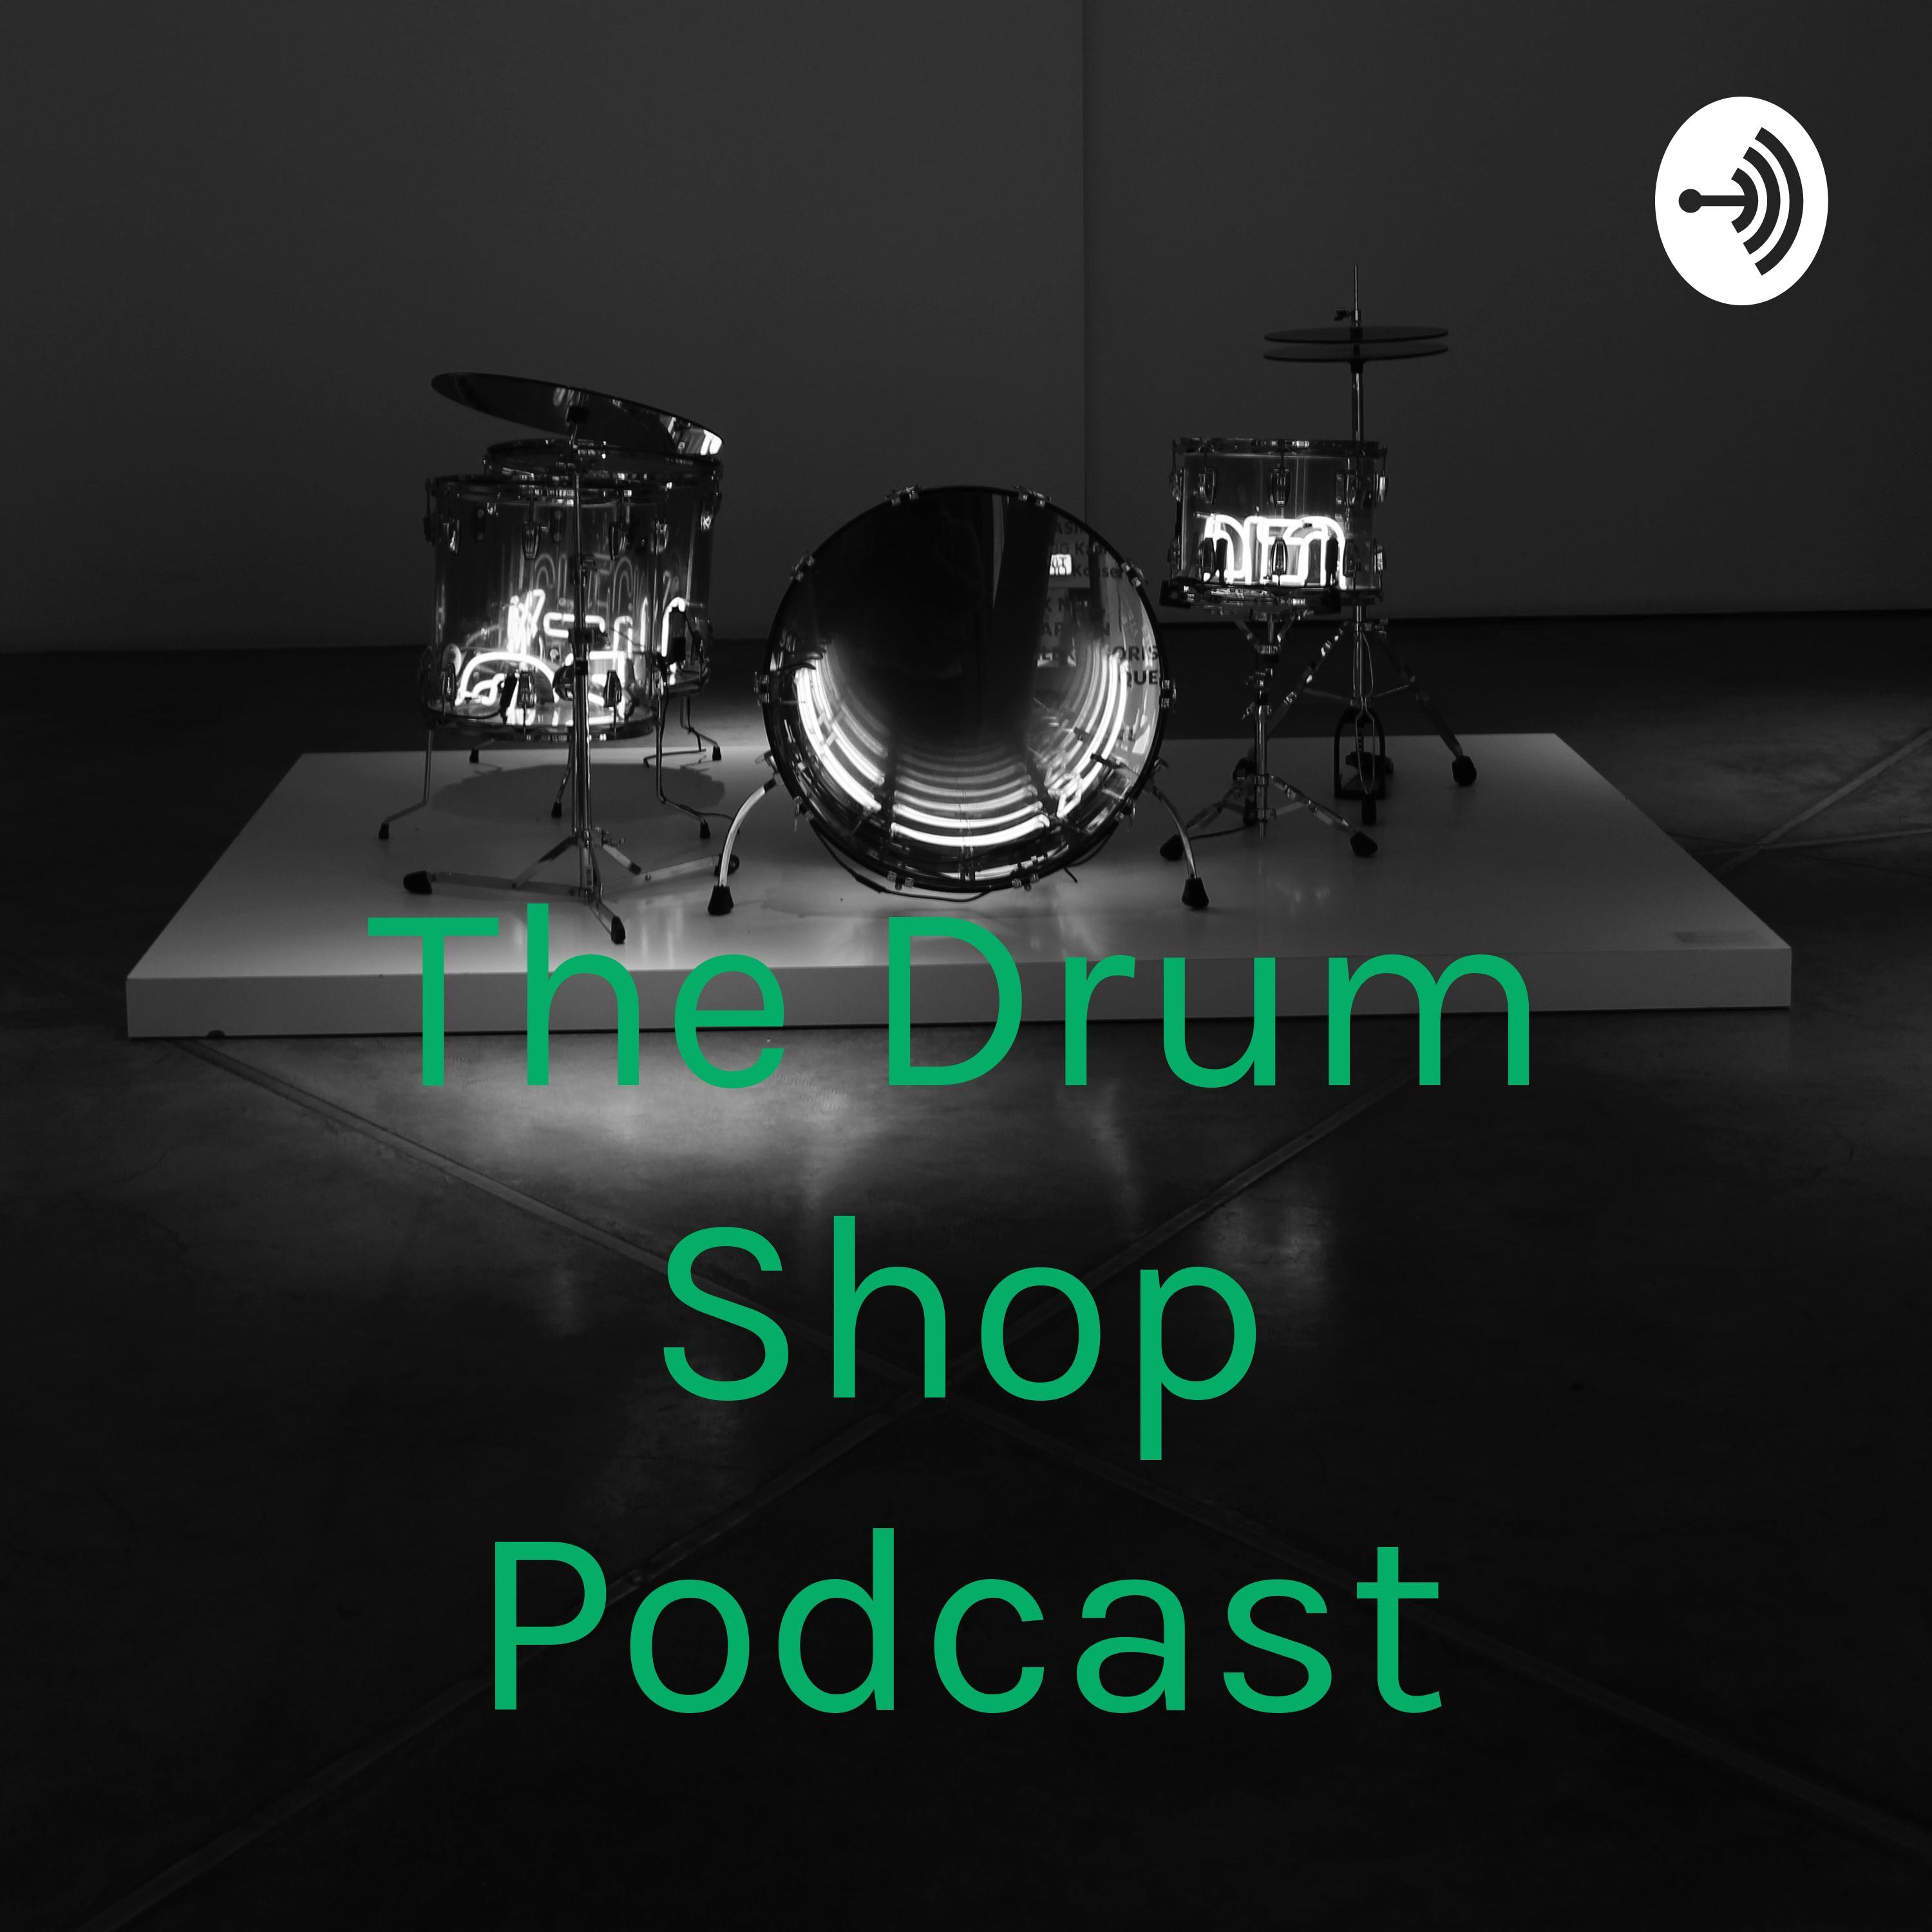 The Drum Shop Podcast